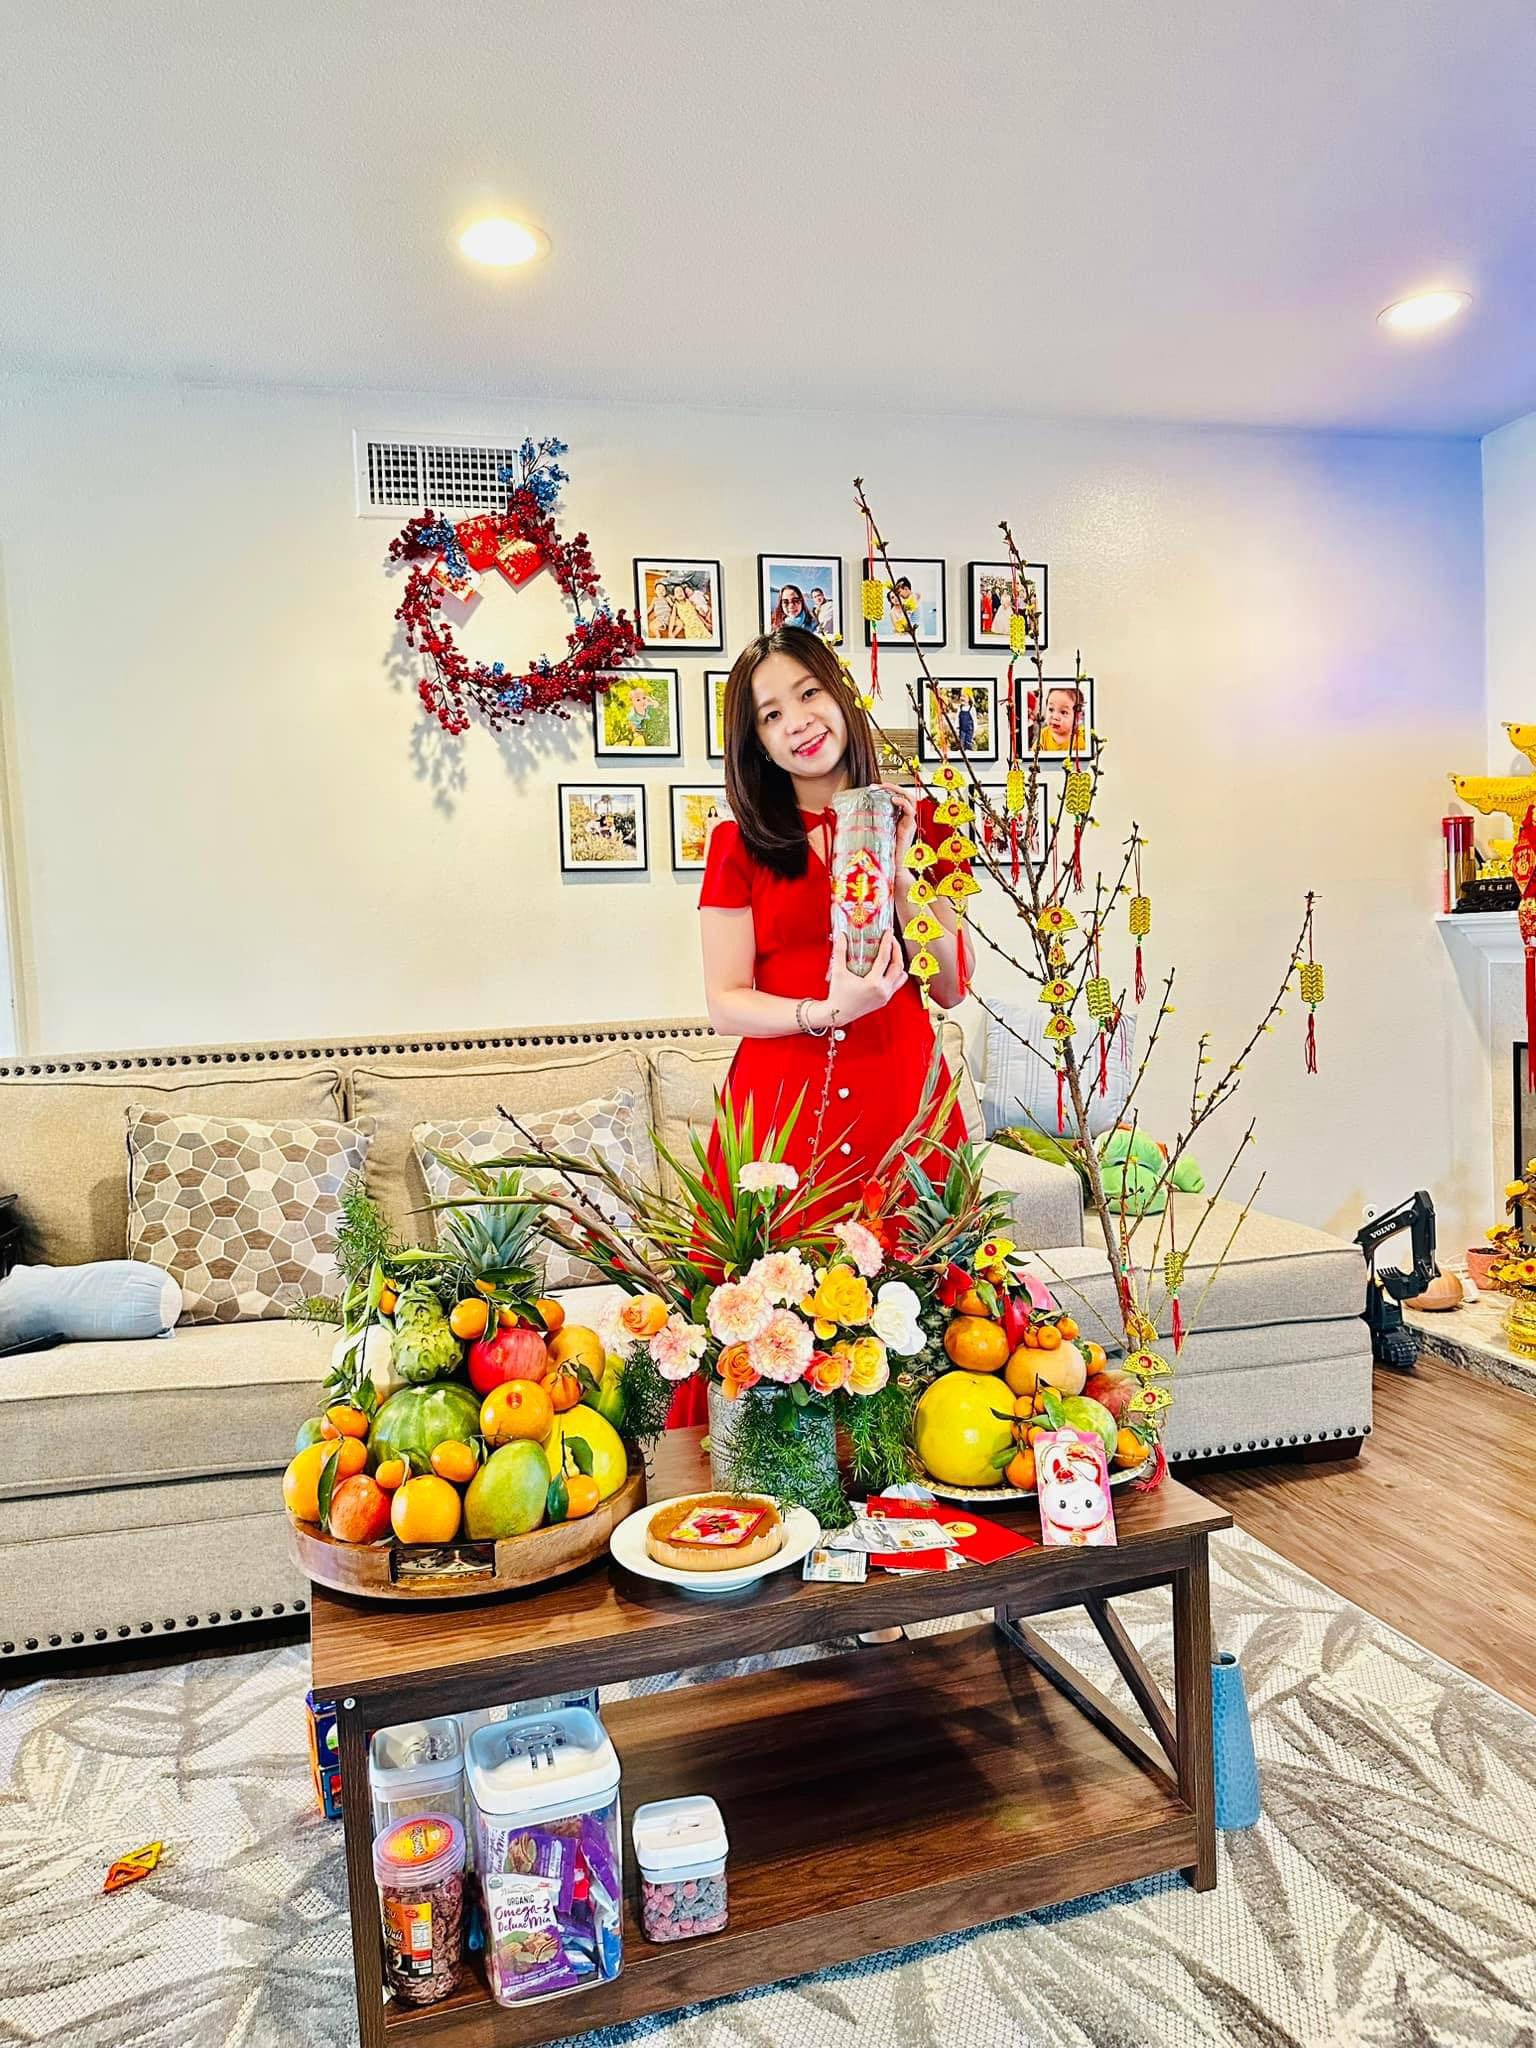 Nguyen Thi Hoang Phu, who lives in the United States with her husband and son, poses for a photo with a fruit tray and flowers for the 2023 Lunar New Year holiday. Photo: Supplied